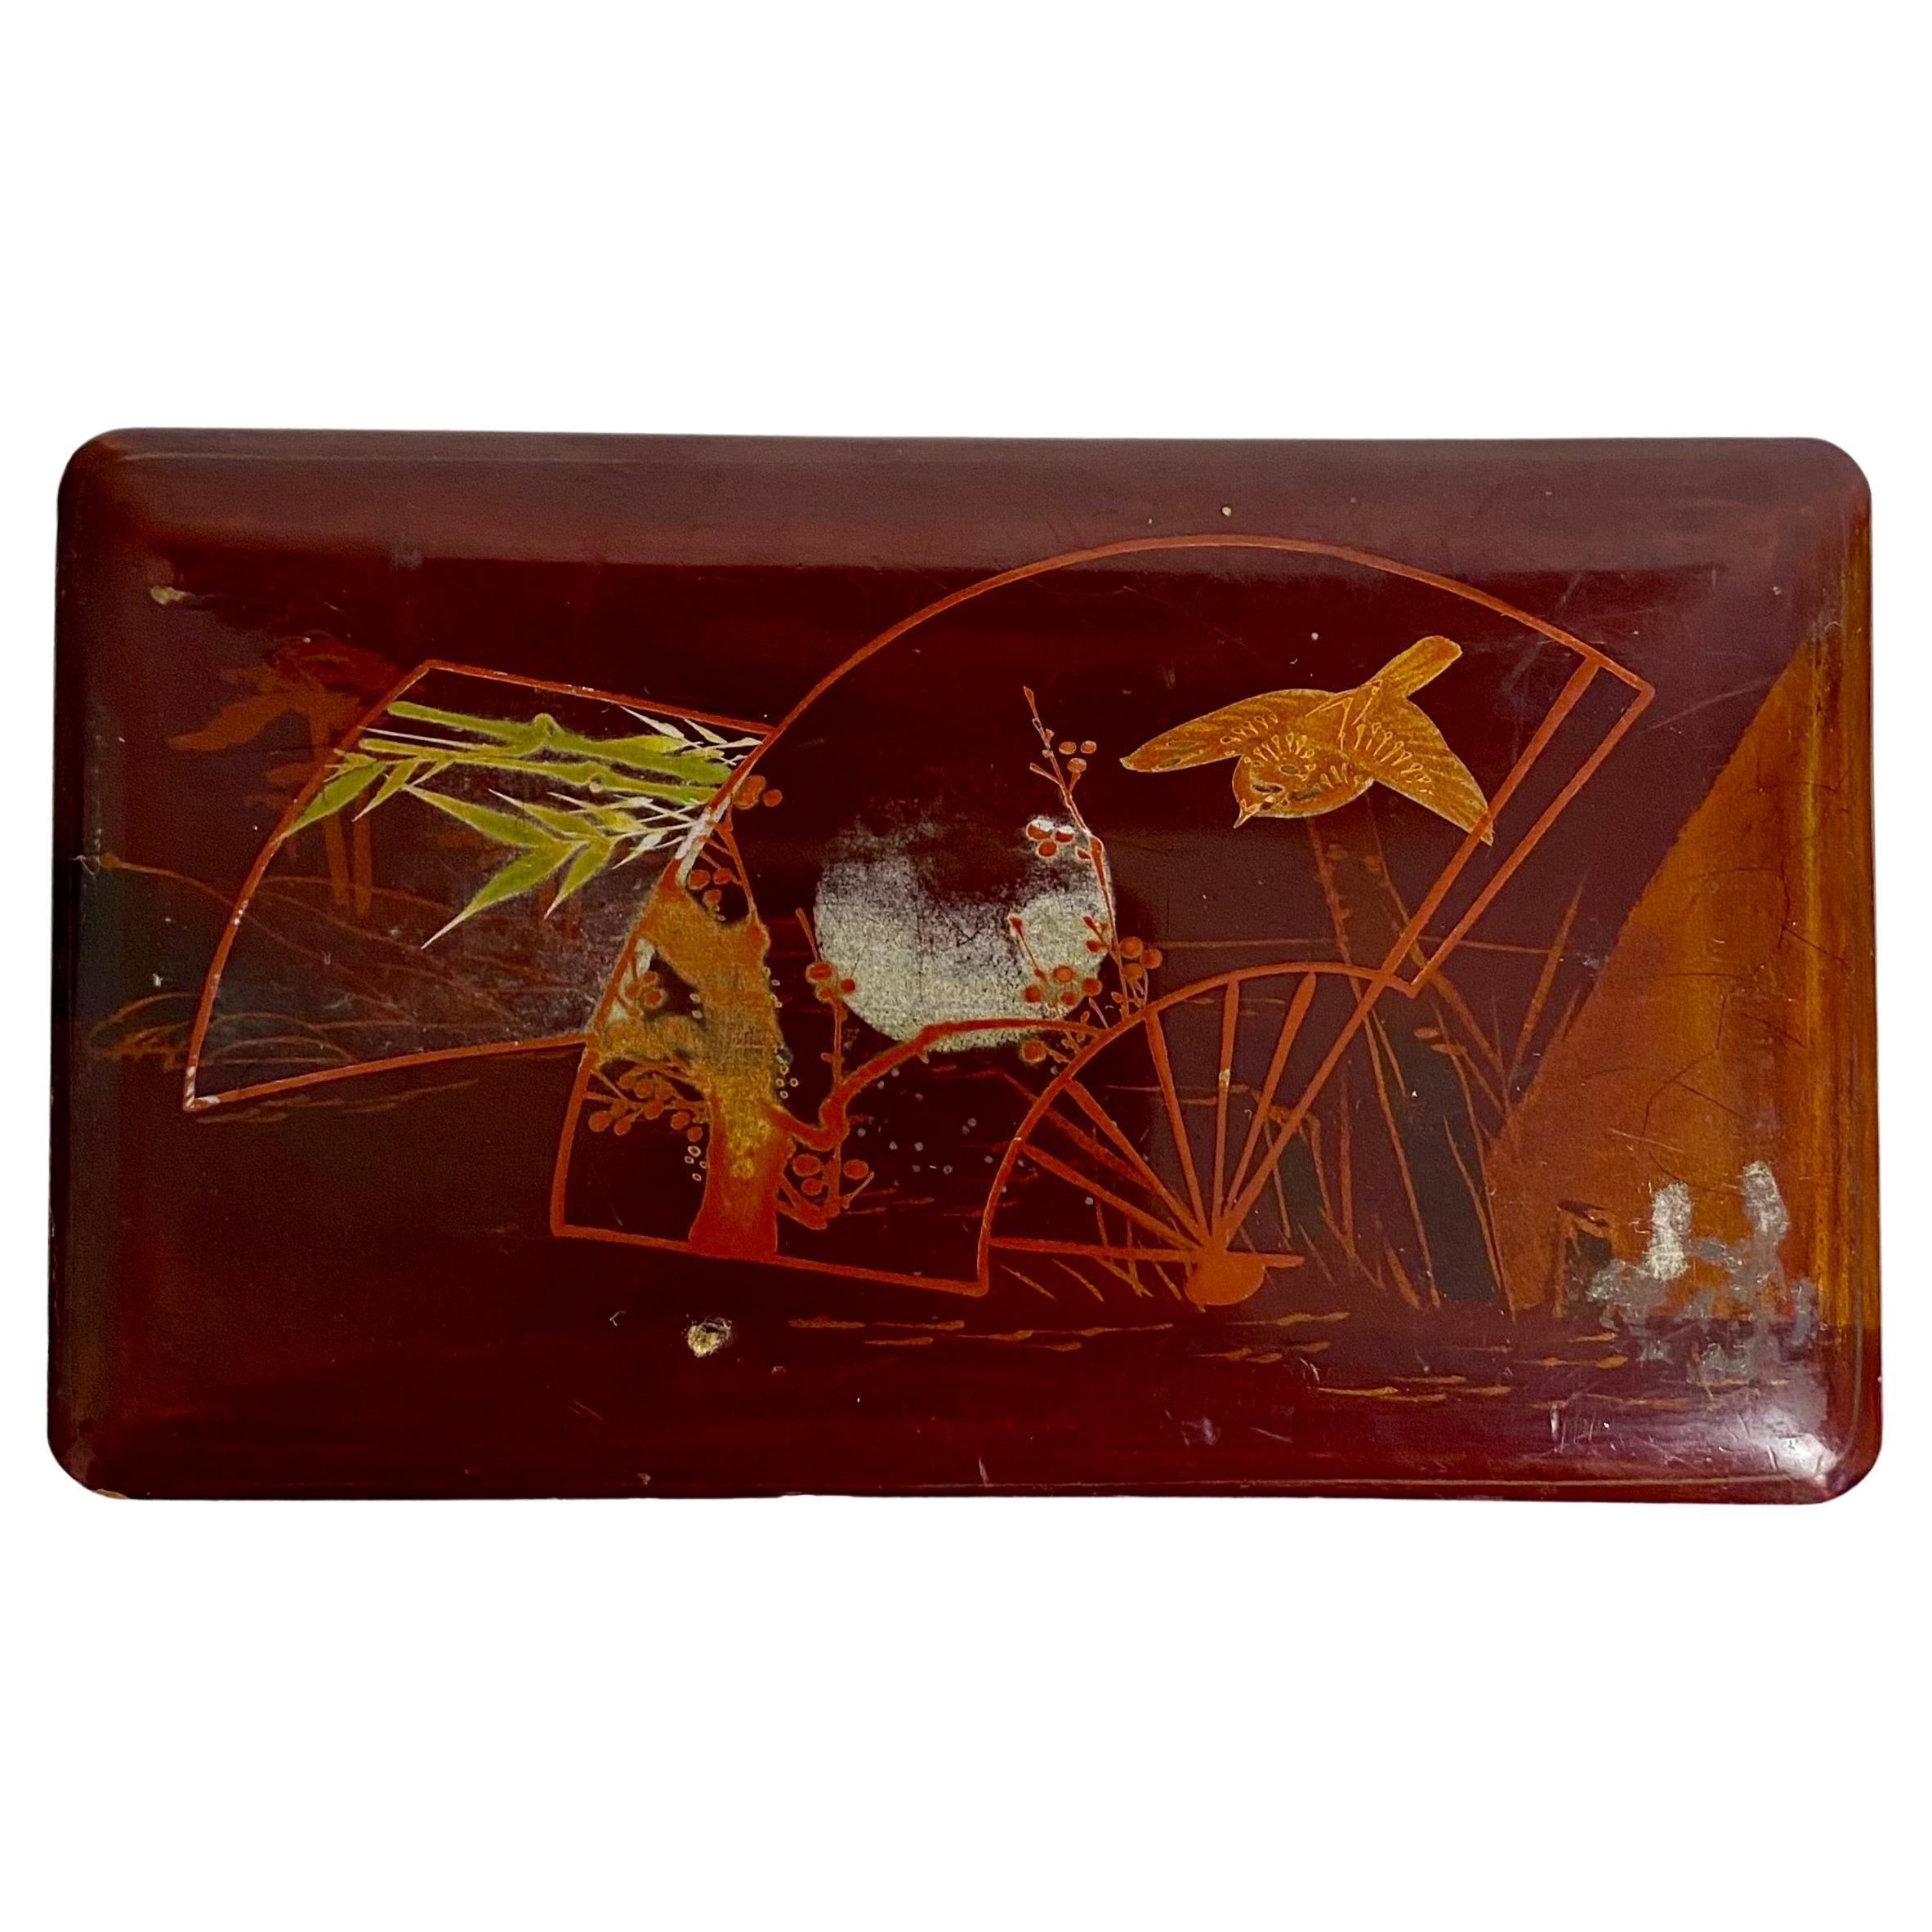 Beautiful Japanese box in red lacquered wood;
19th century
The lid is decorated with a landscape with a bird, trees and a setting sun. 
The inside of the box is covered with a lacquered black paint.
Small format
Japan Late 19th century.
